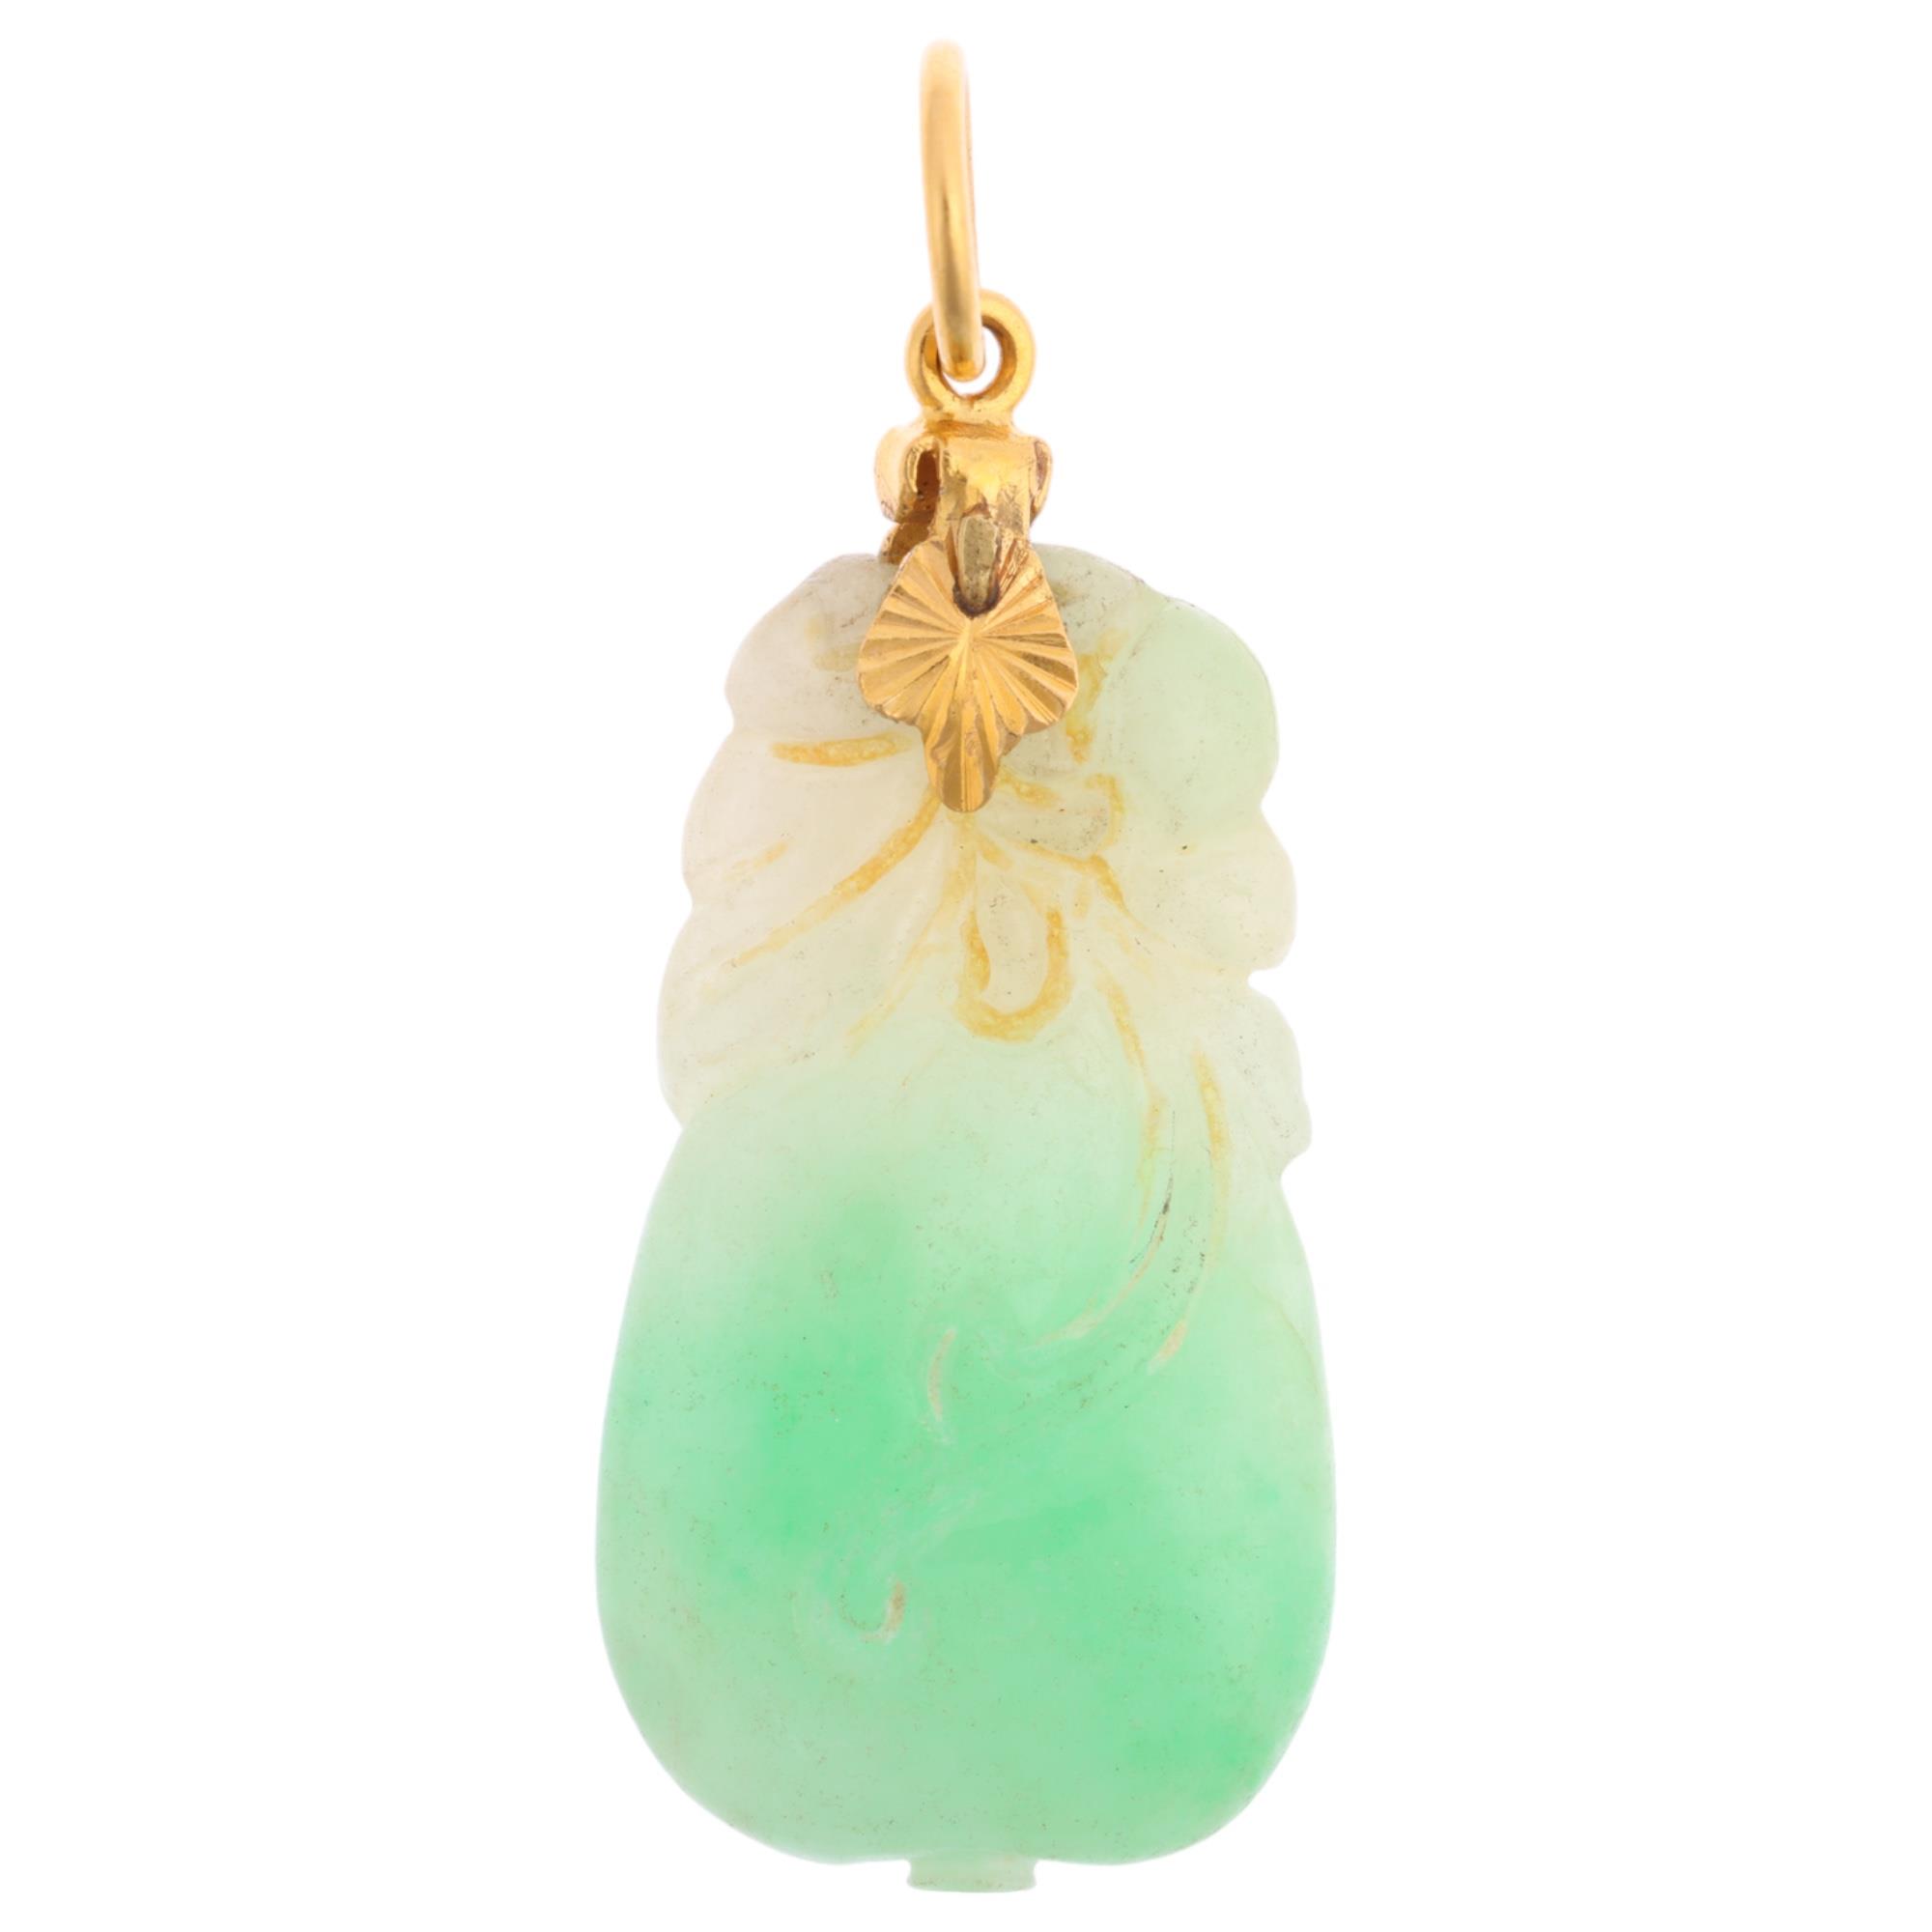 A Chinese carved jade gourd fruit pendant, with unmarked 21ct gold mount, 32.3mm, 3.9g Condition